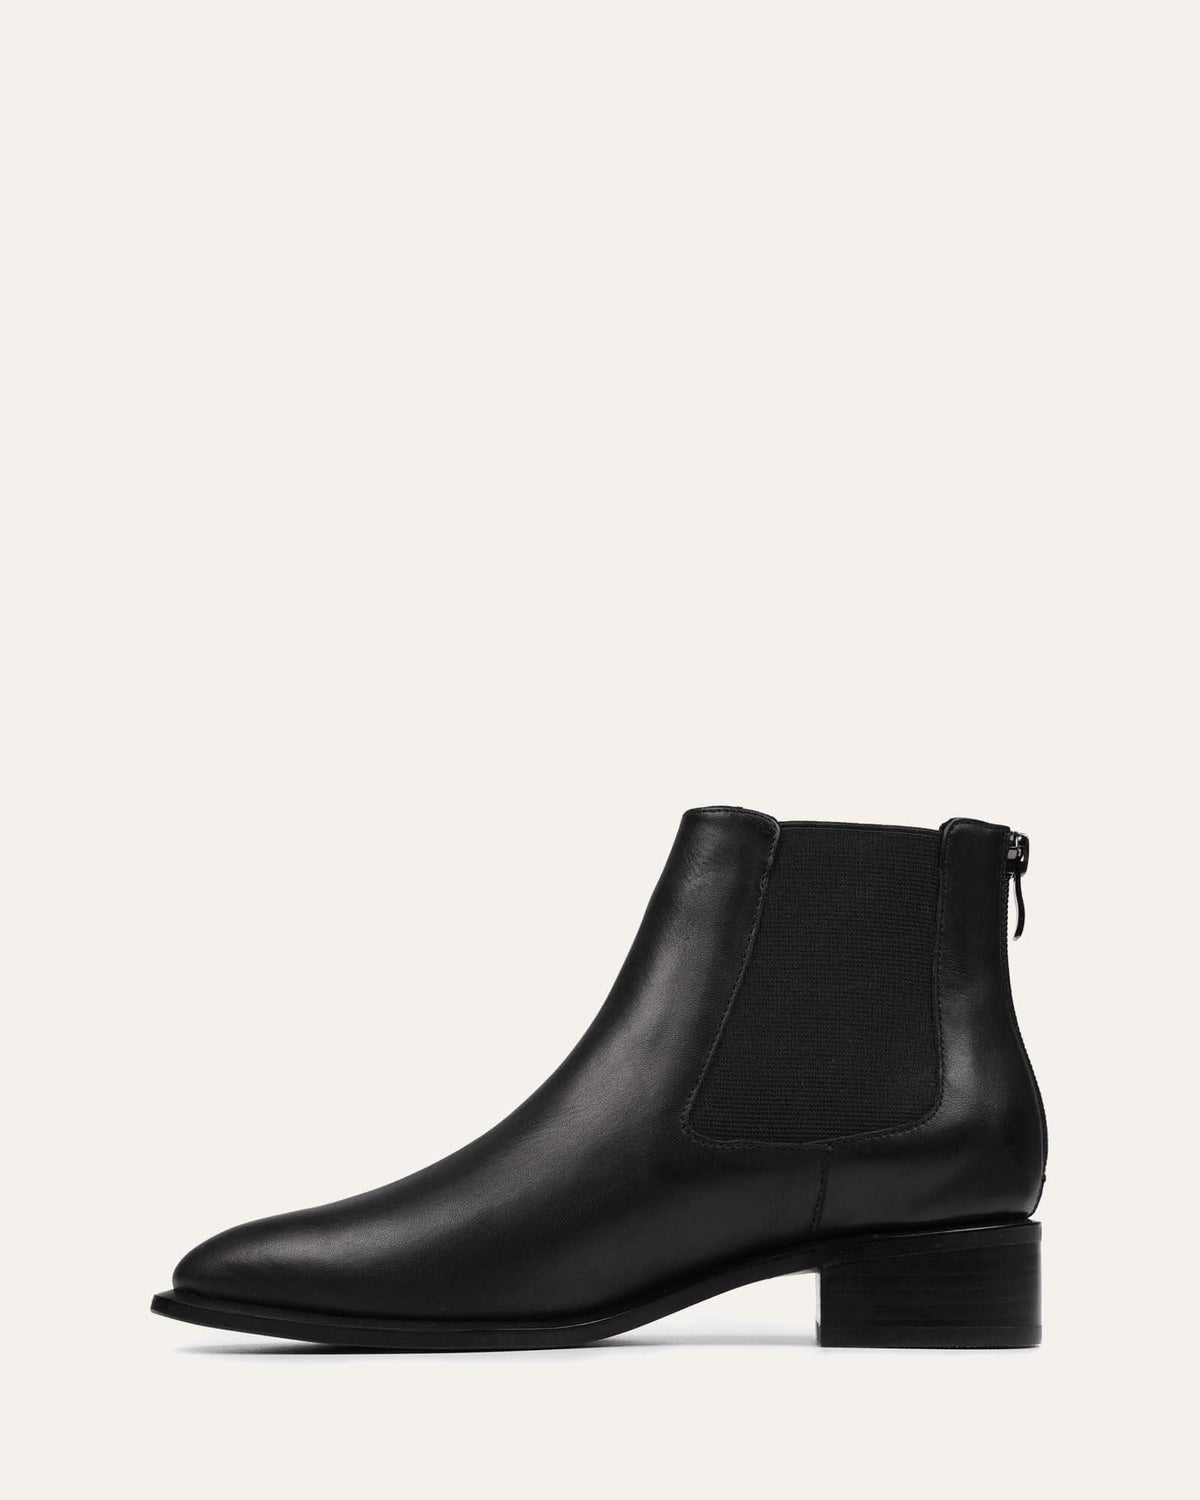 MILLA FLAT ANKLE BOOTS BLACK LEATHER